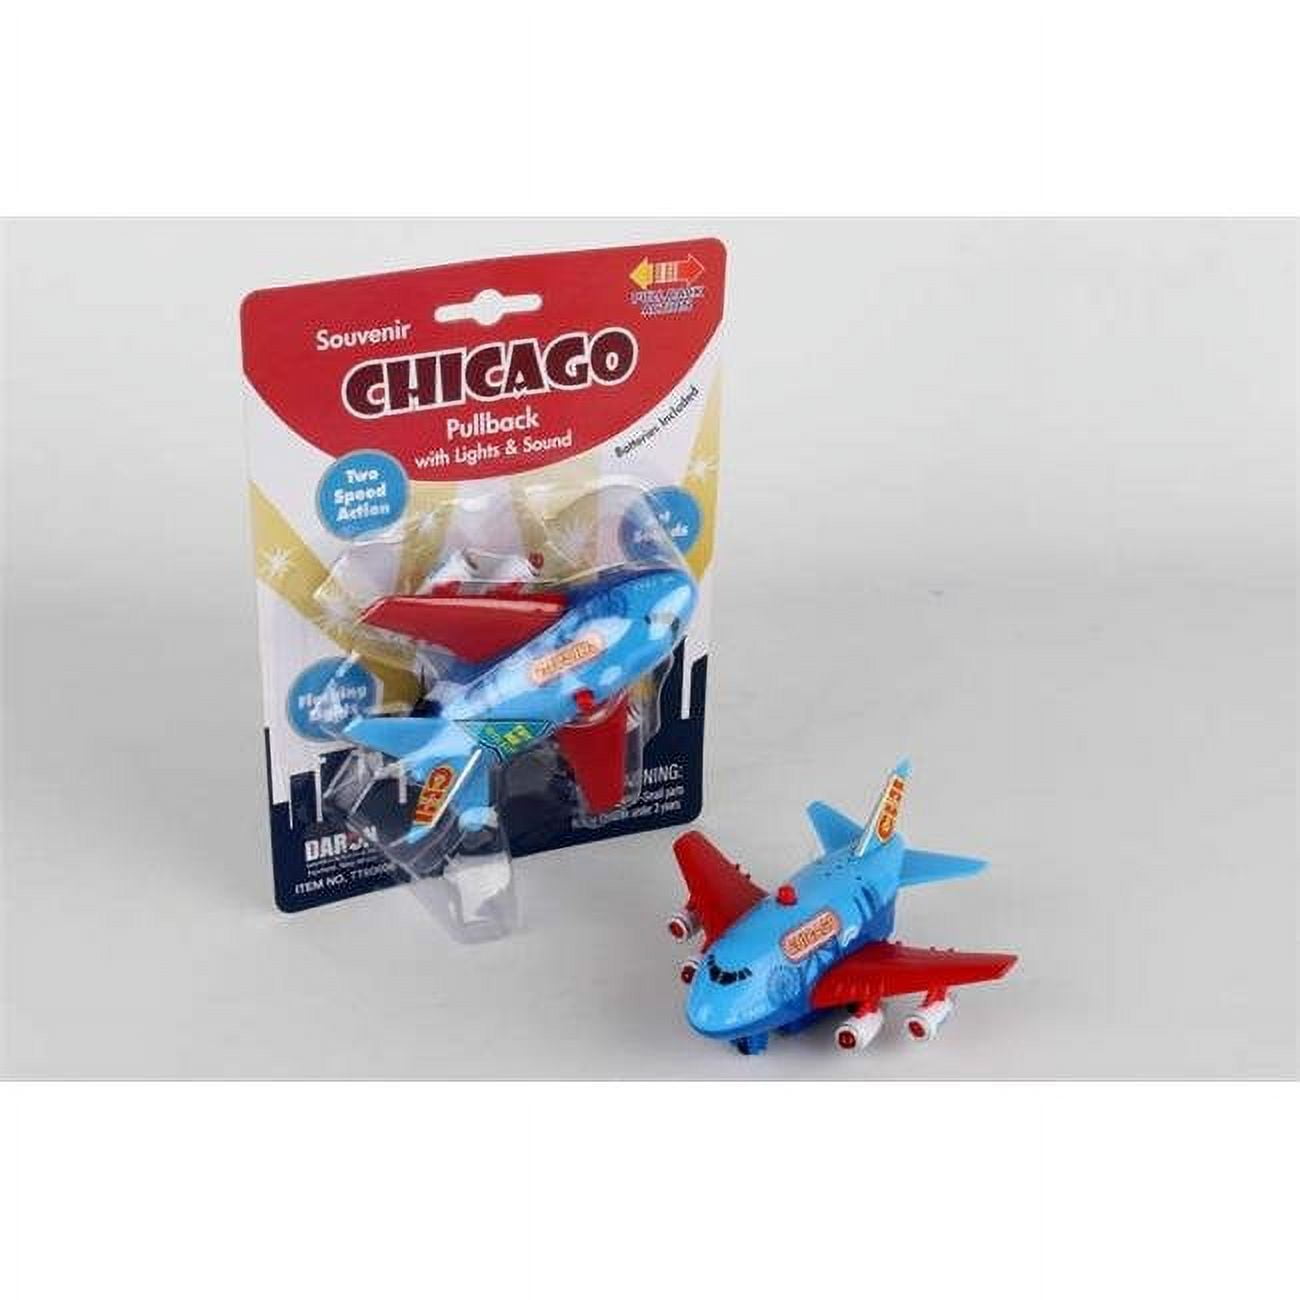 Picture of Toytech TT60606 Chicago Pullback with Light & Sound Toy Airplane